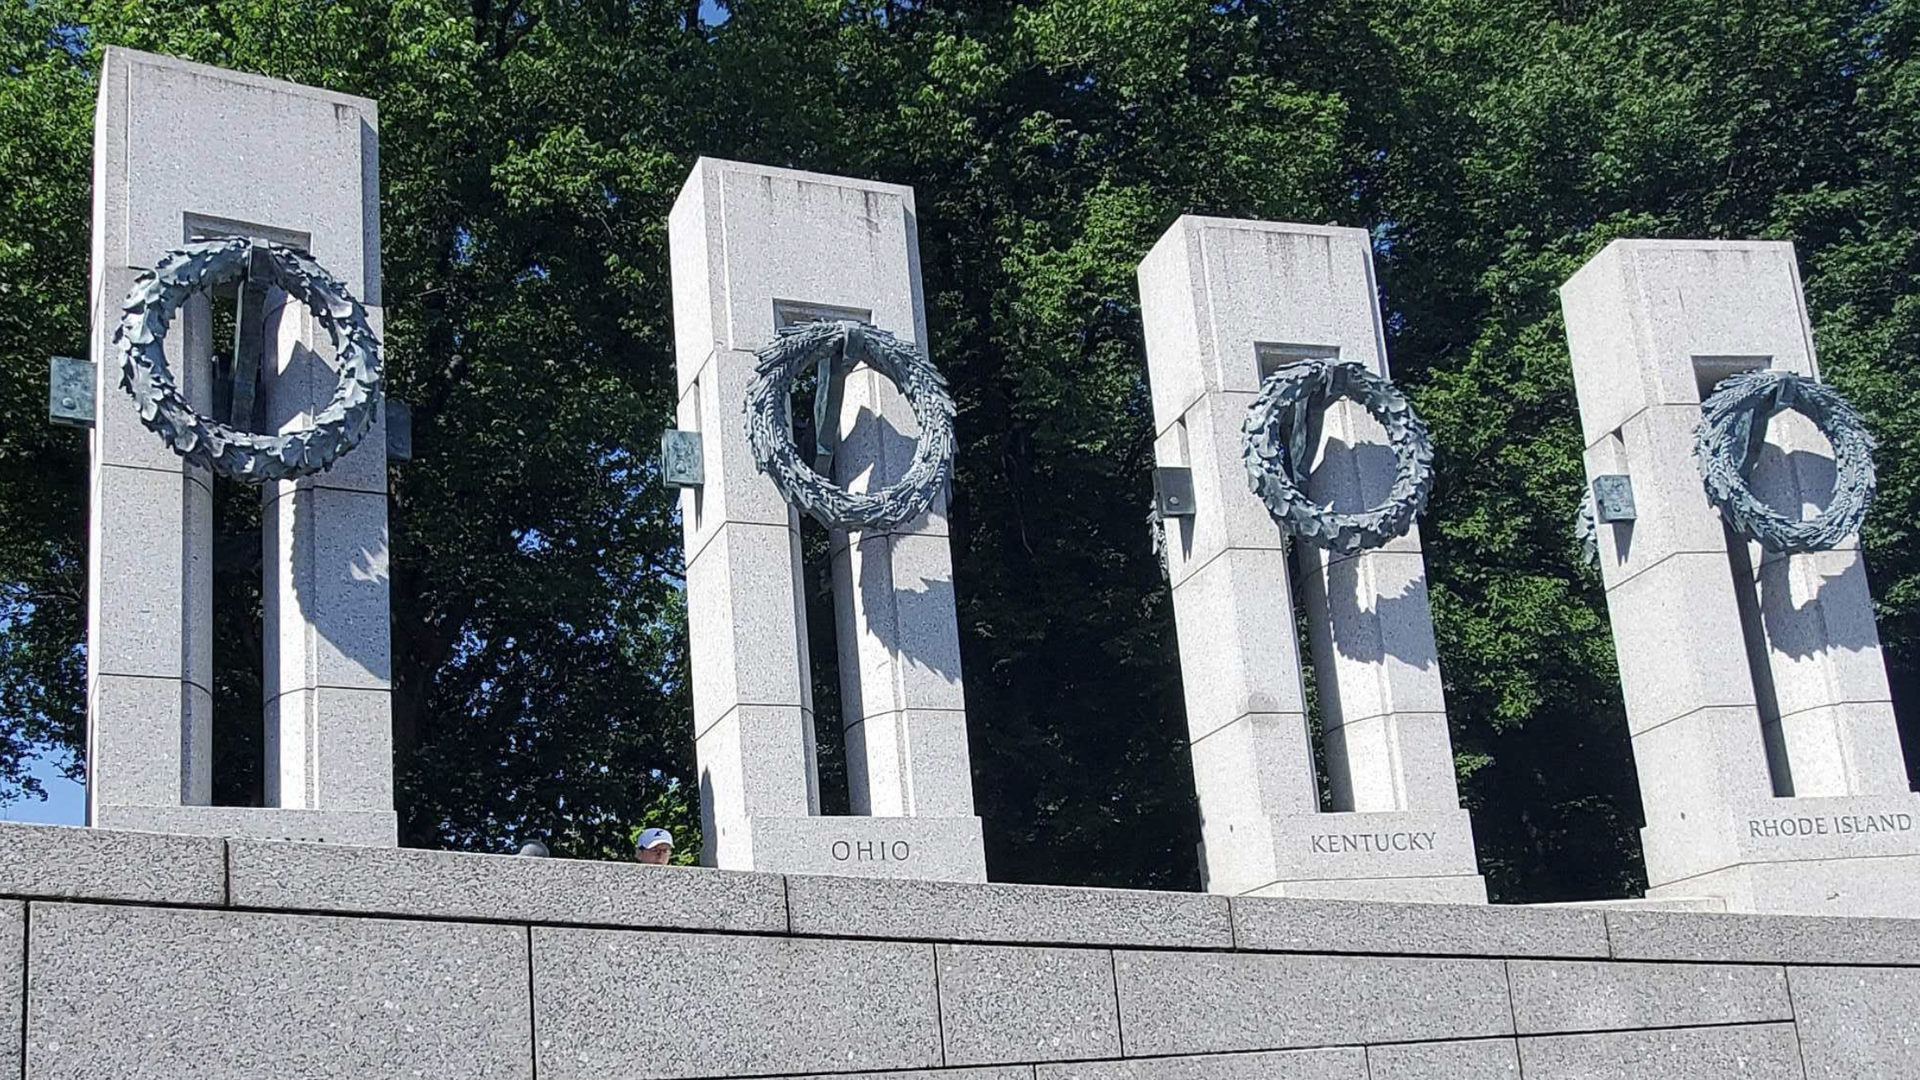 A tribute to Ohio at the World War II memorial in Washington D.C. 